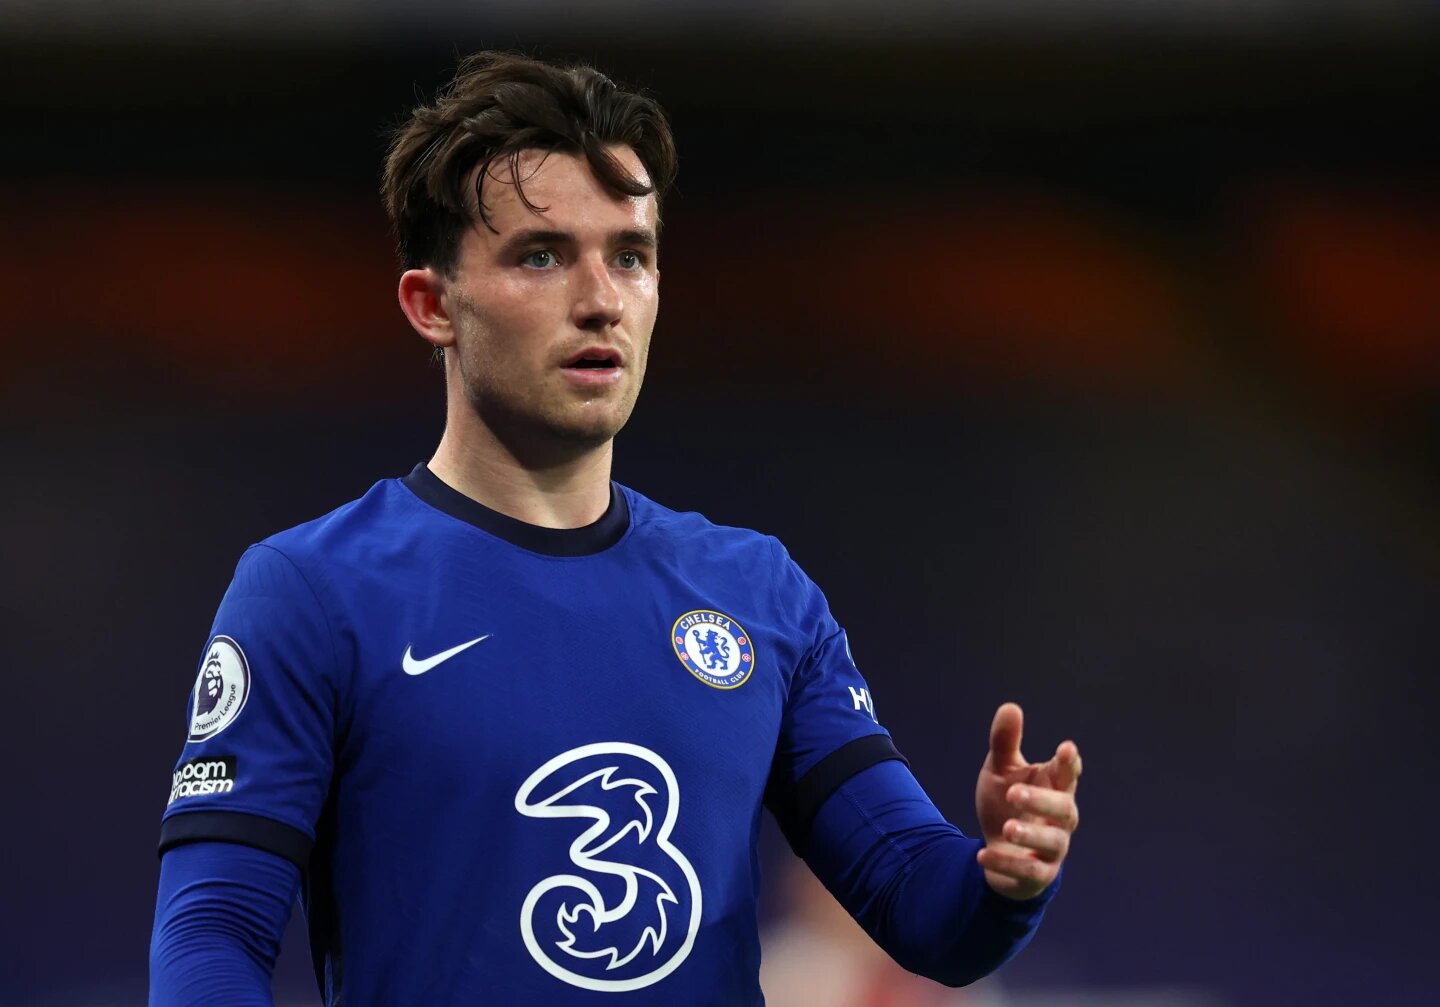  Chelsea star Ben Chilwell set to sign new four-year multi-million pound contract to end Man City transfer interest